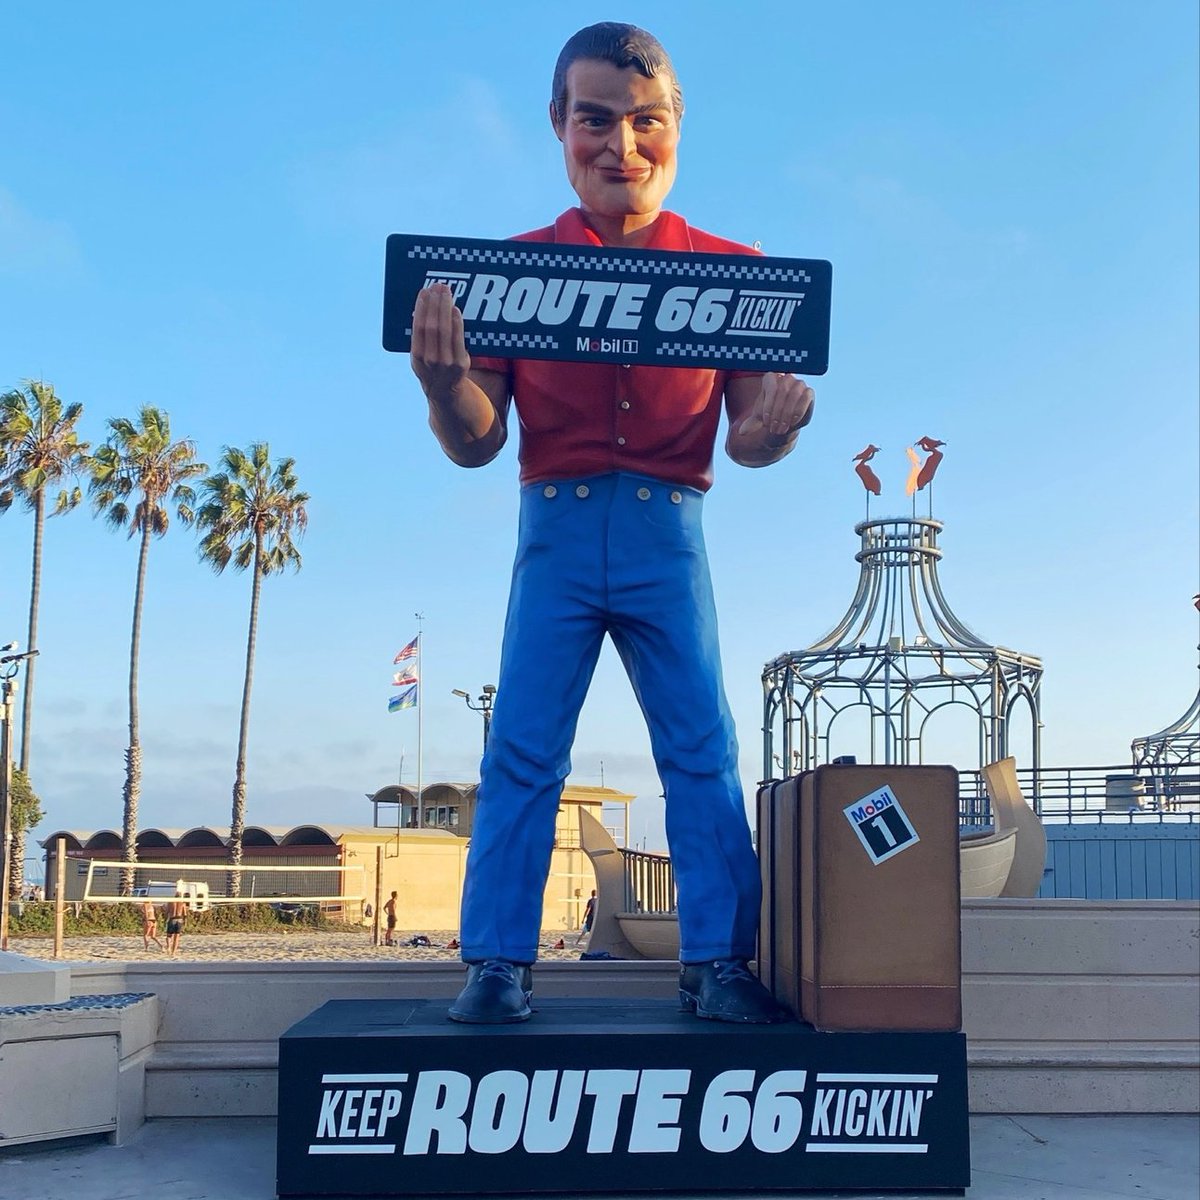 We're headed to Albuquerque because Route 66 is an icon of American culture & the quintessential road trip. Mobil 1 is celebrating this with the Keep Route 66 Kickin’ campaign. We're stoked to be involved since nobody road trips like MLE.
#Mobil1Roadtrip #Keep66Kickin #Route66